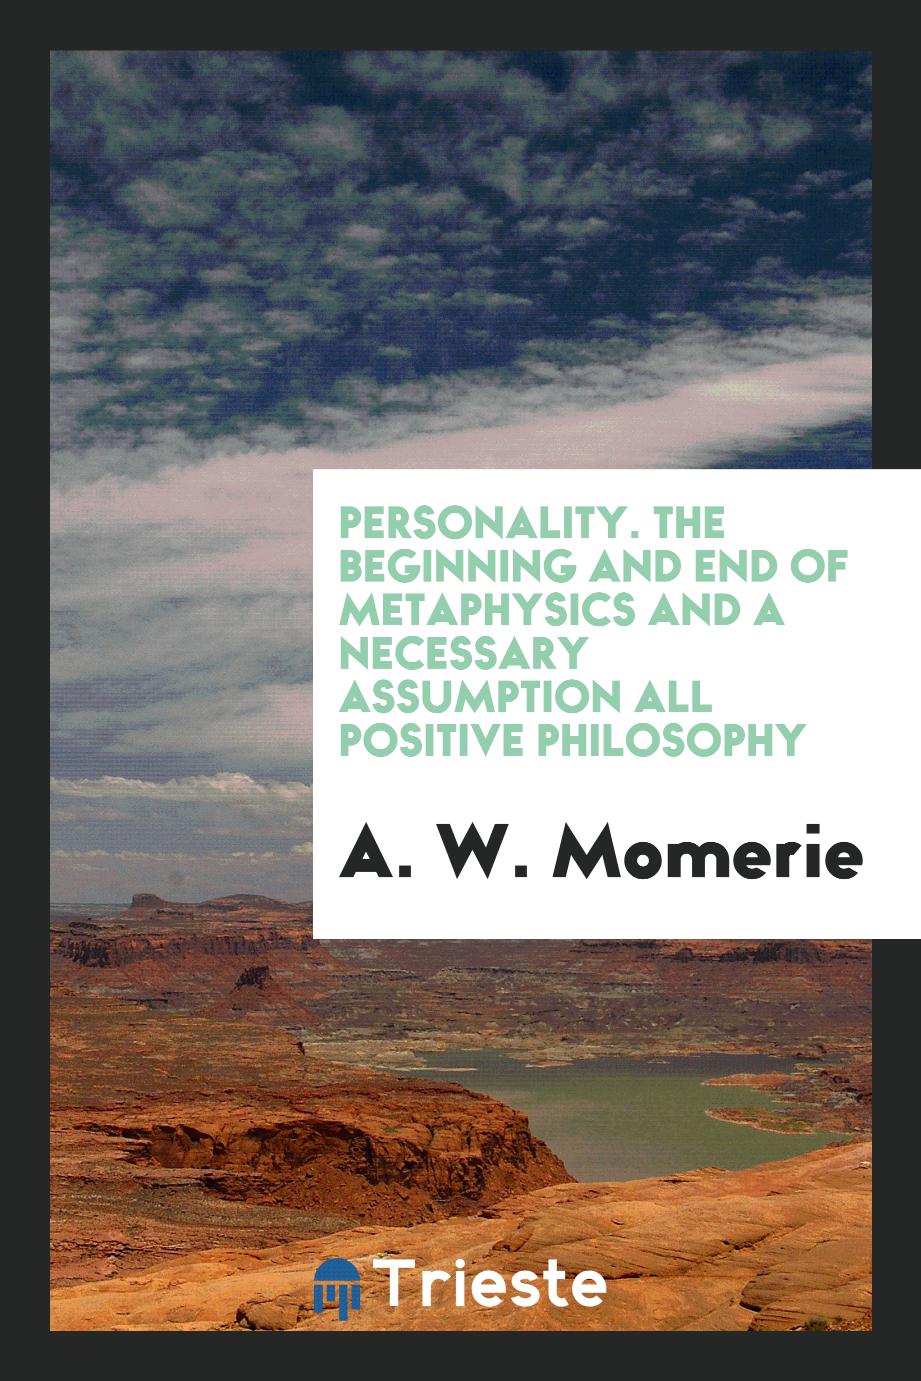 Personality. The Beginning and End of Metaphysics and a Necessary Assumption All Positive Philosophy